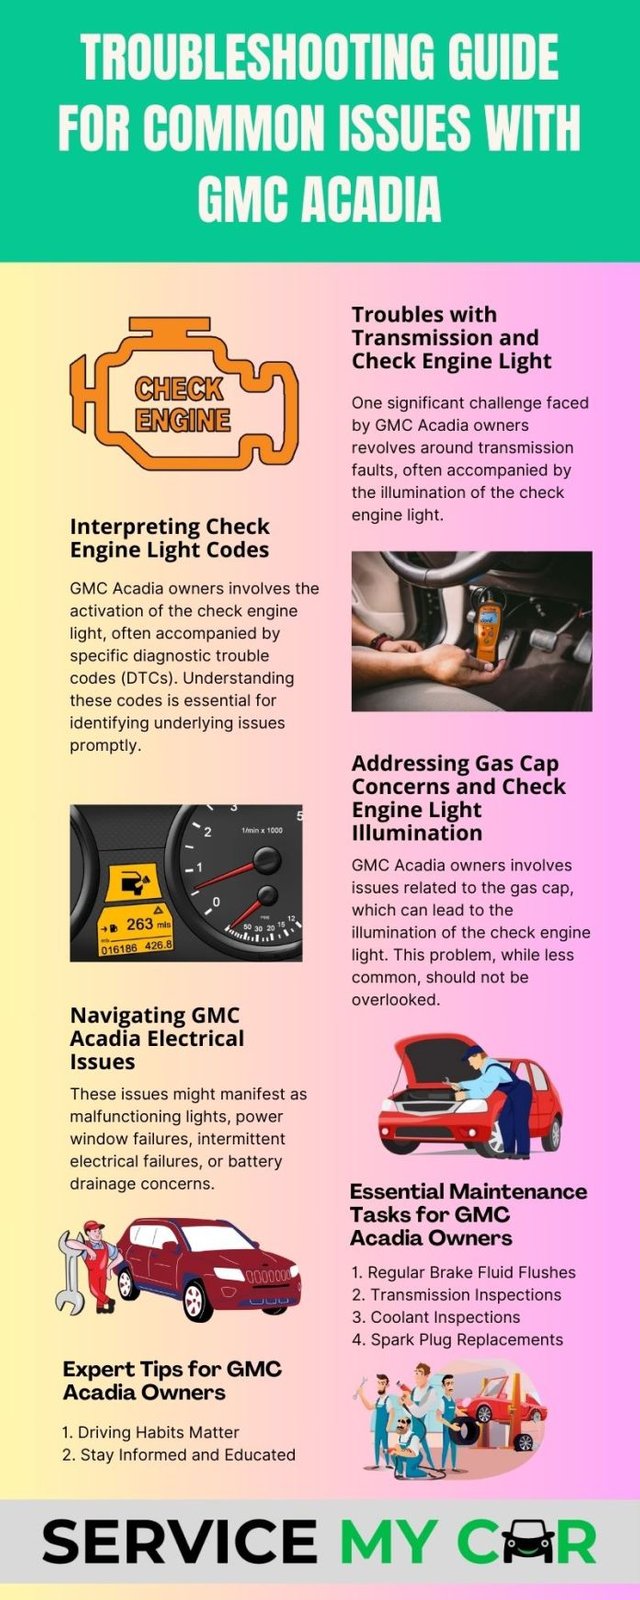 Troubleshooting Guide for Common Issues with GMC Acadia